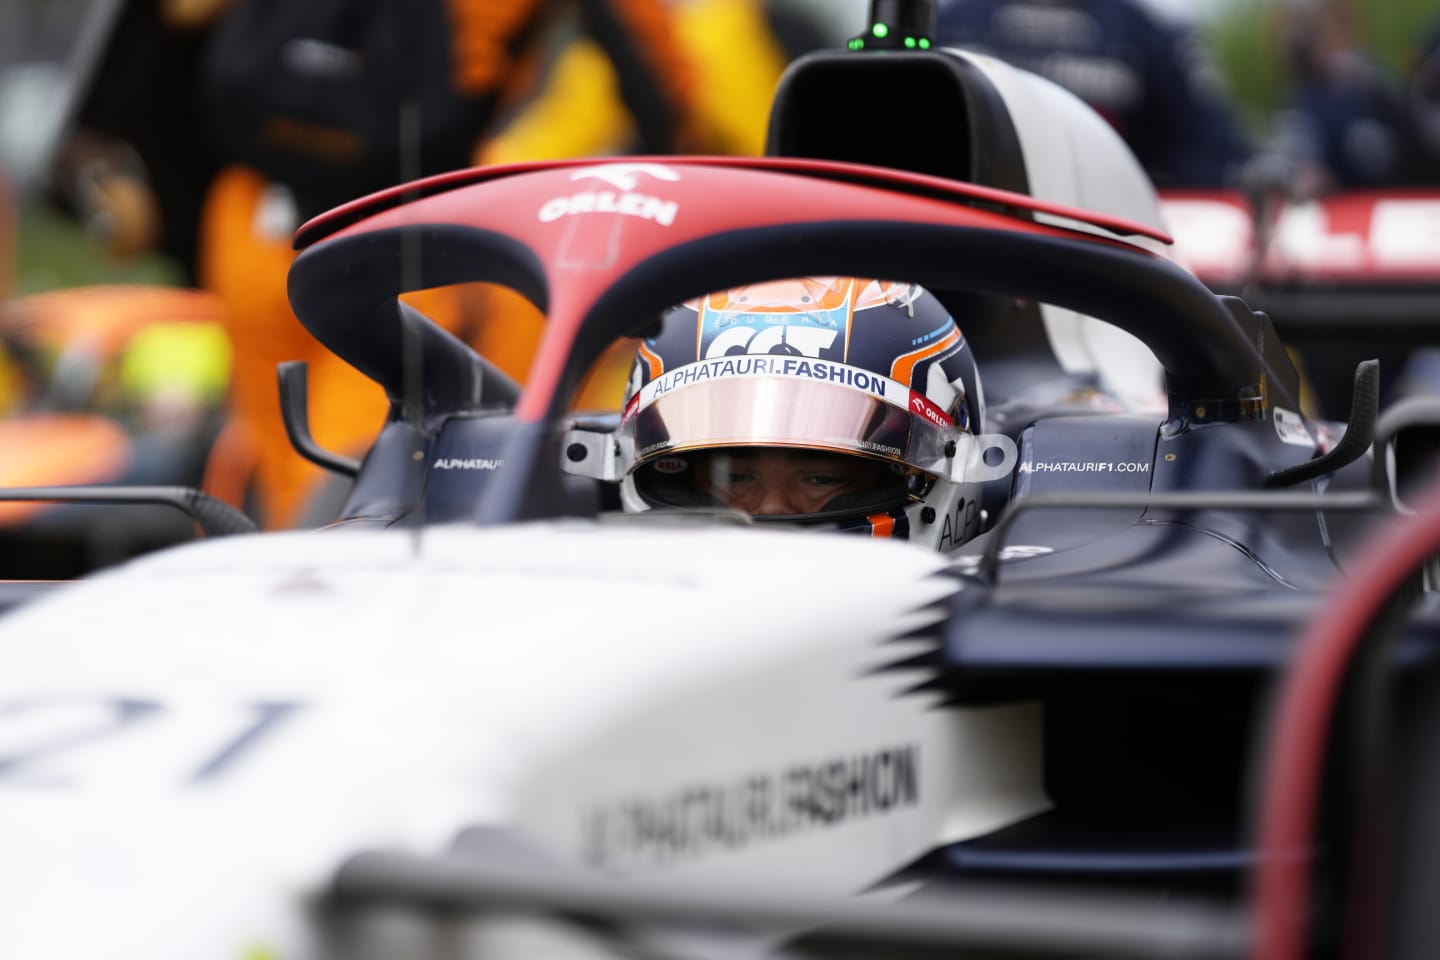 MONTREAL, QUEBEC - JUNE 18: Nyck de Vries of Netherlands and Scuderia AlphaTauri prepares to drive on the grid during the F1 Grand Prix of Canada at Circuit Gilles Villeneuve on June 18, 2023 in Montreal, Quebec. (Photo by Rudy Carezzevoli/Getty Images)